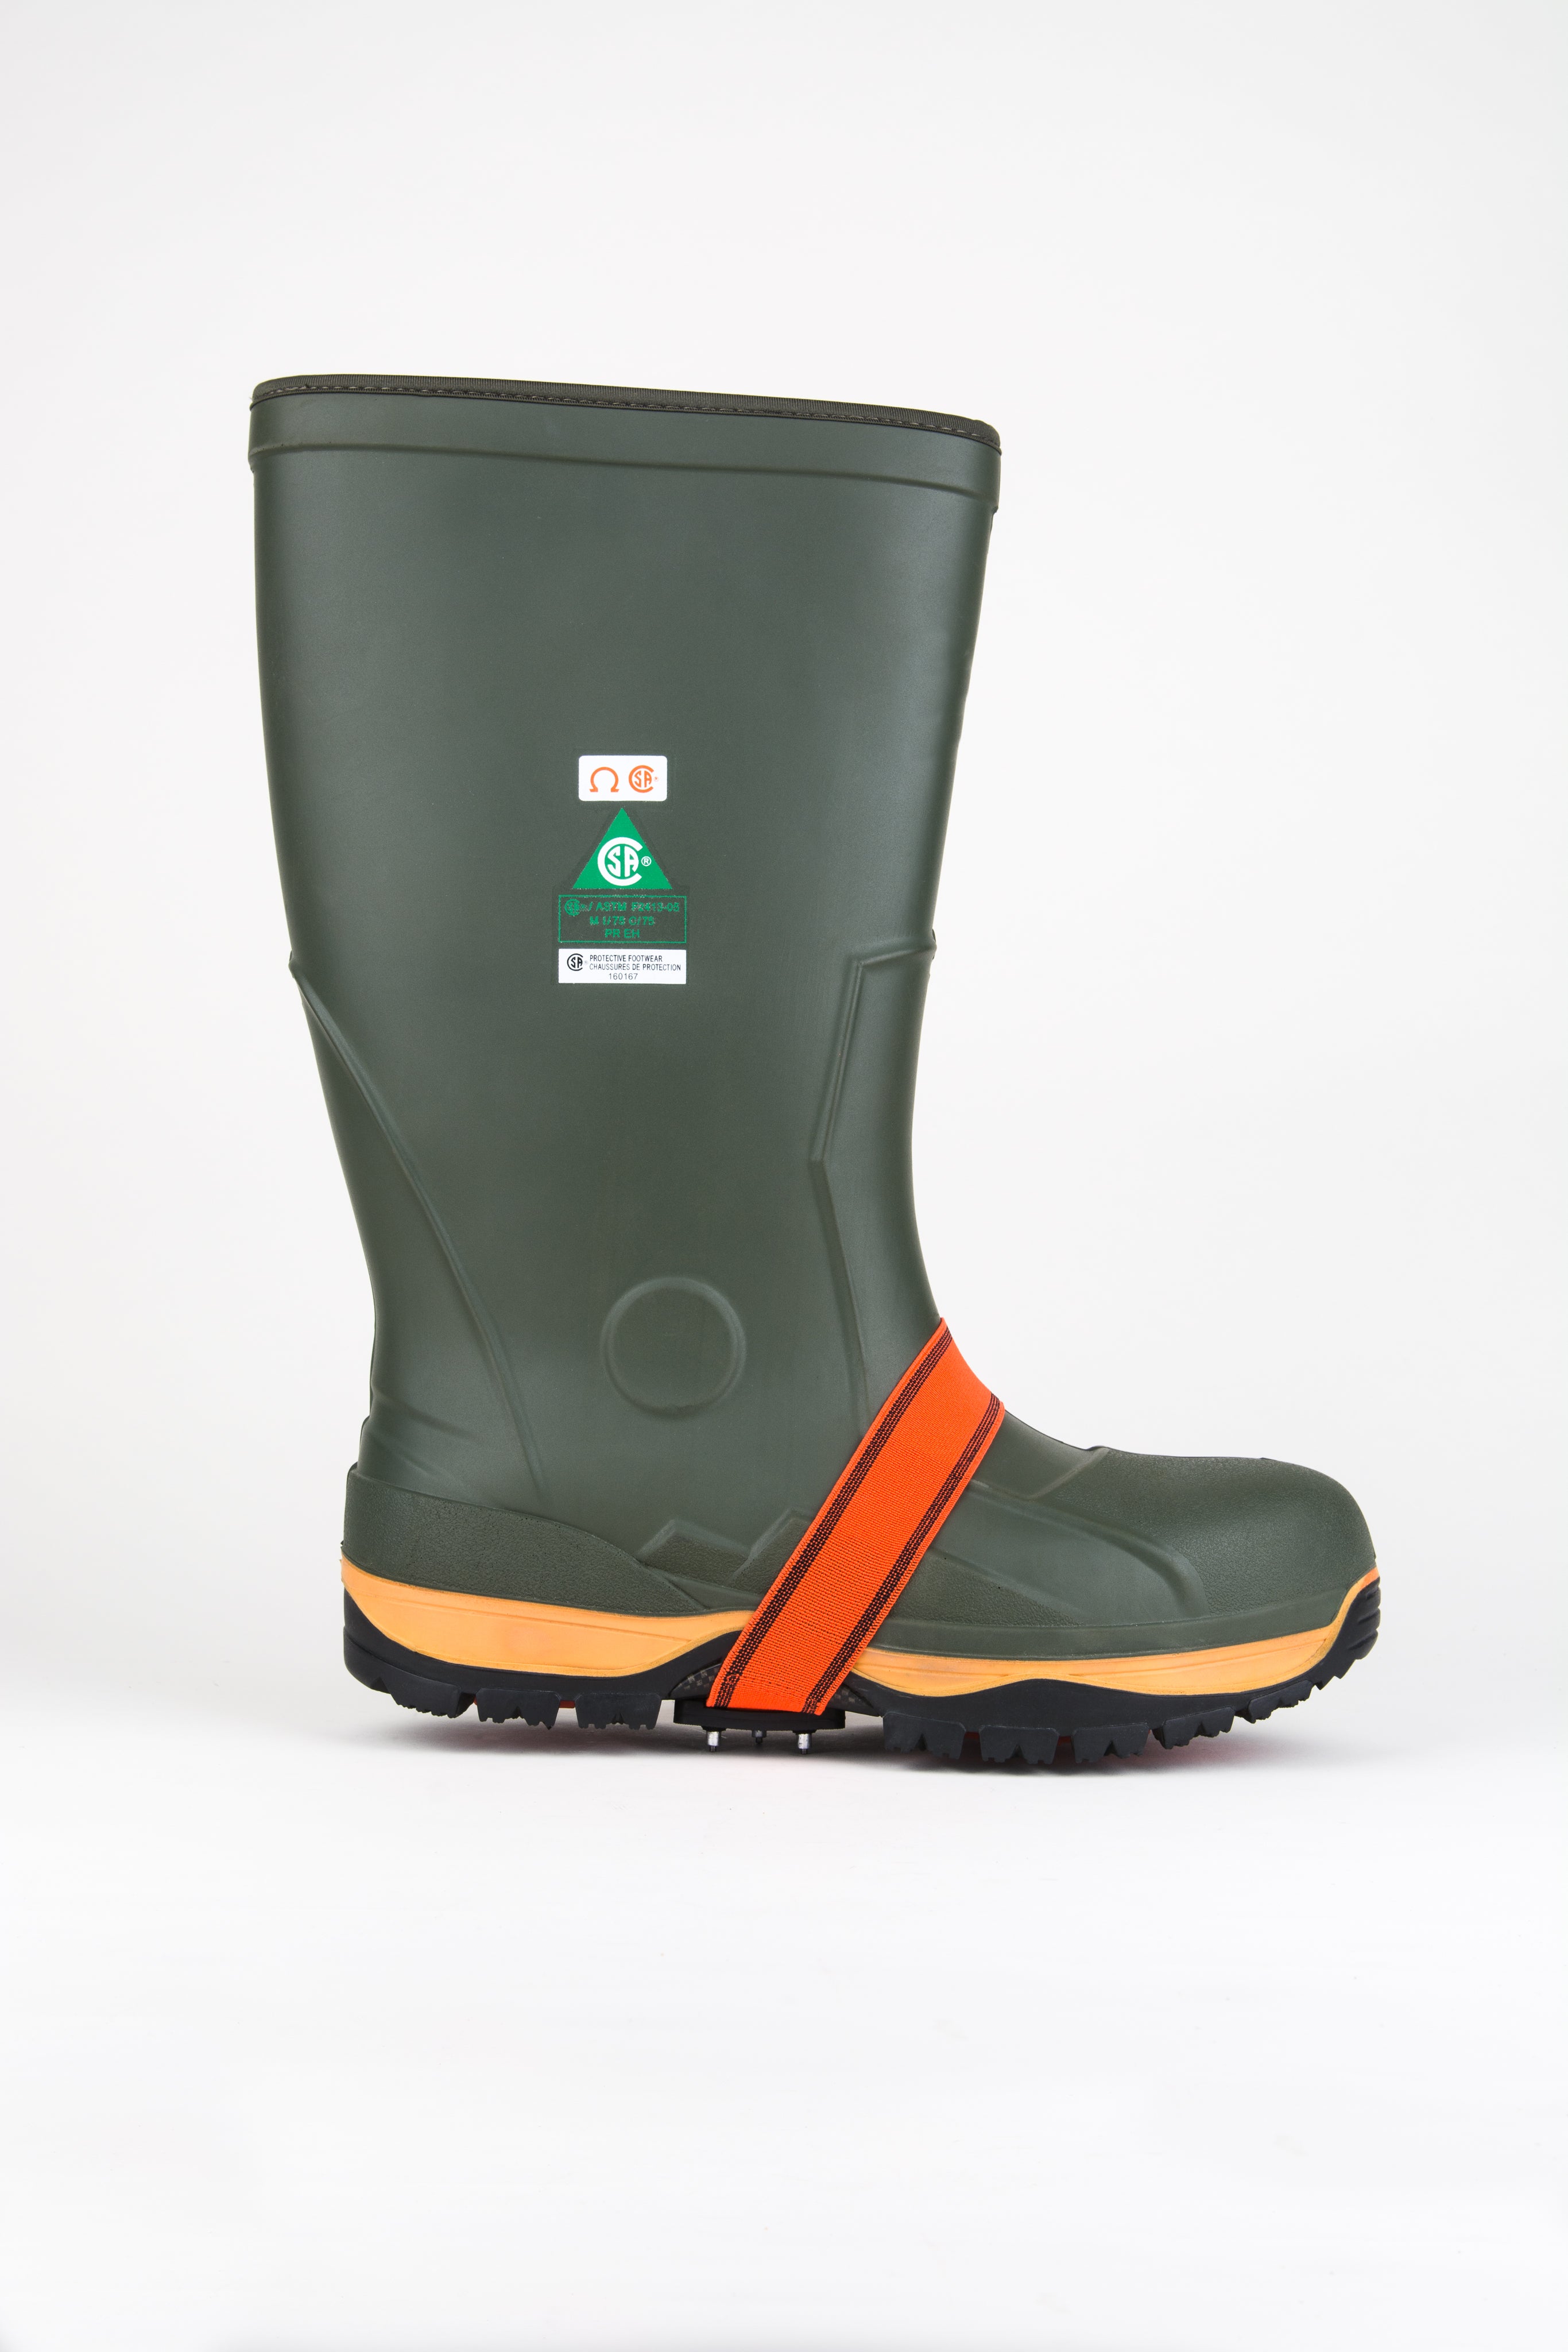 K1 Series Mid-Sole High Profile Hi-Vis Ice Cleat (For Deep Tread Boots) Work Boots - Cleanflow